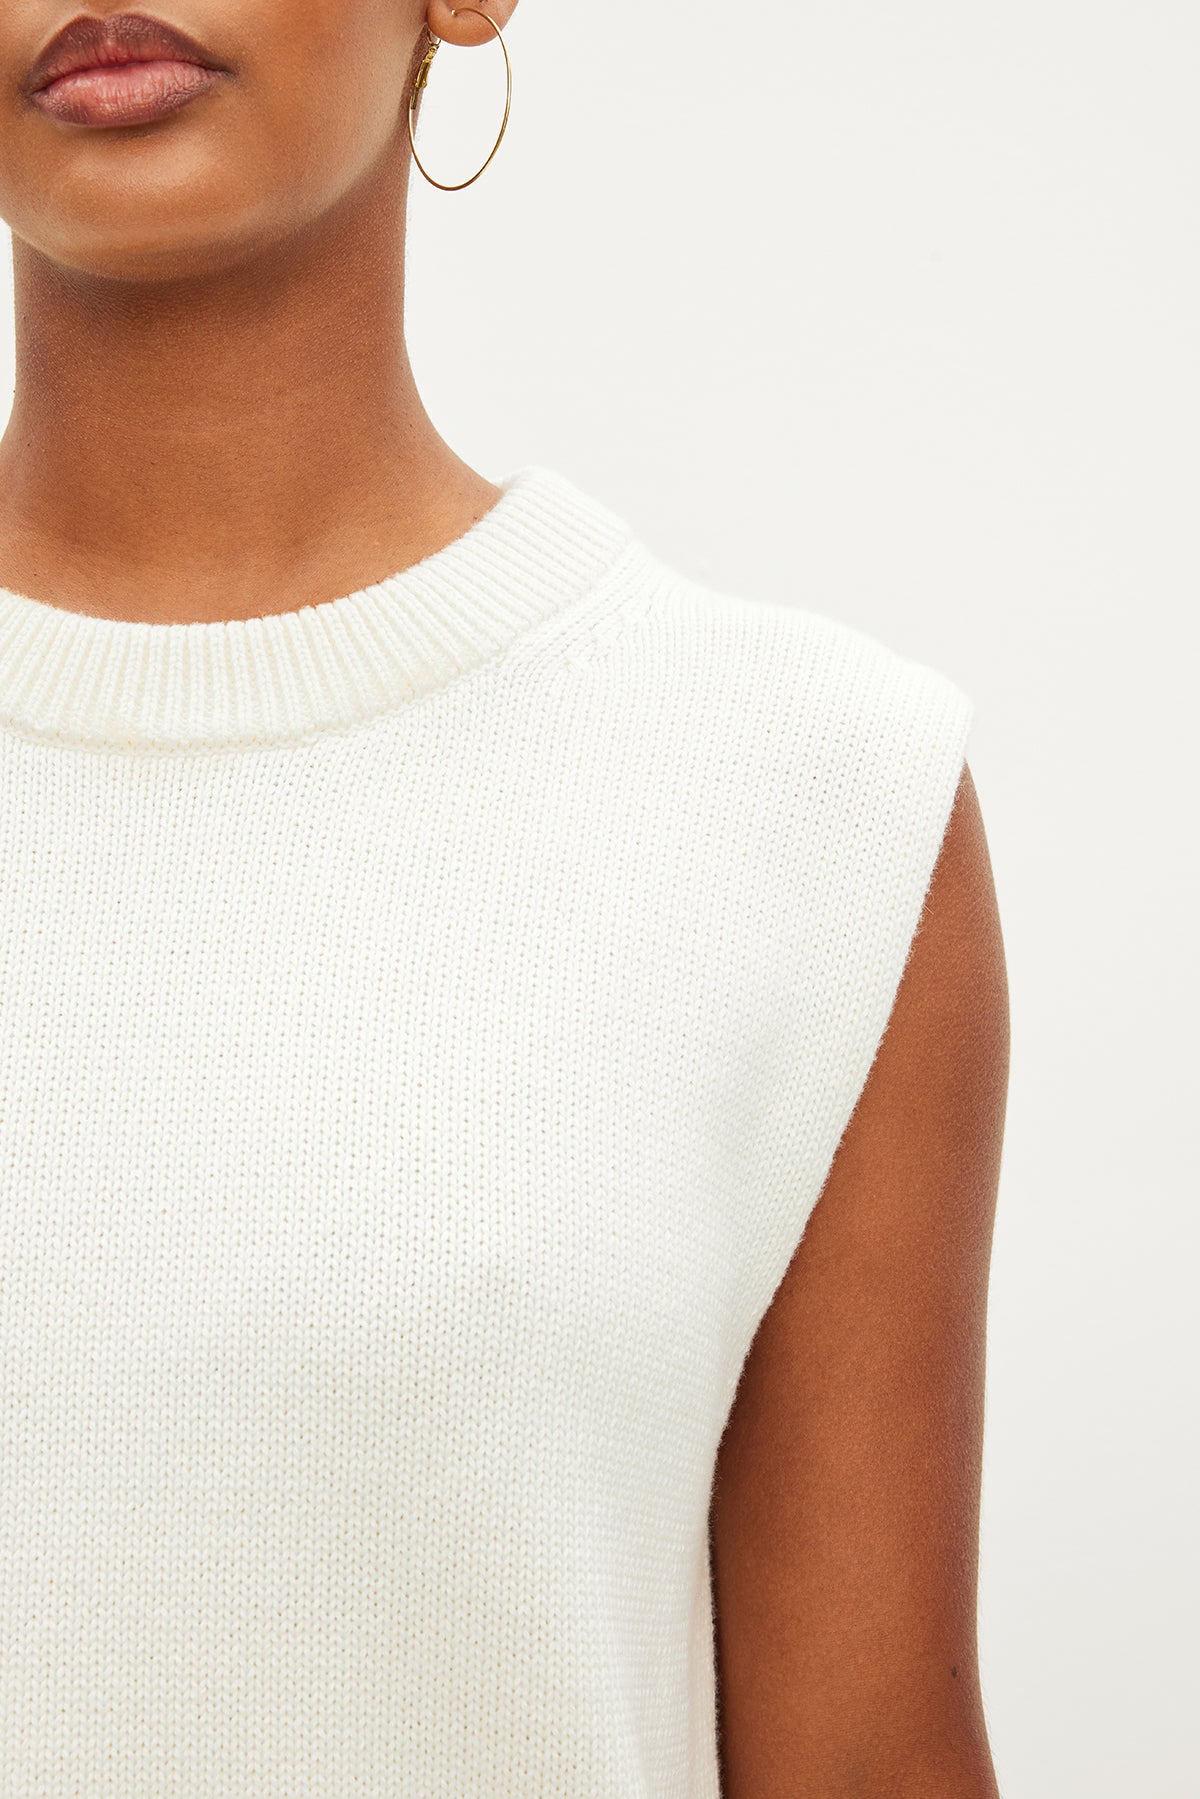   A woman in a luxurious white Velvet by Graham & Spencer ASTER CREW NECK SWEATER, crafted from a blend of cotton and cashmere for ultimate comfort. 